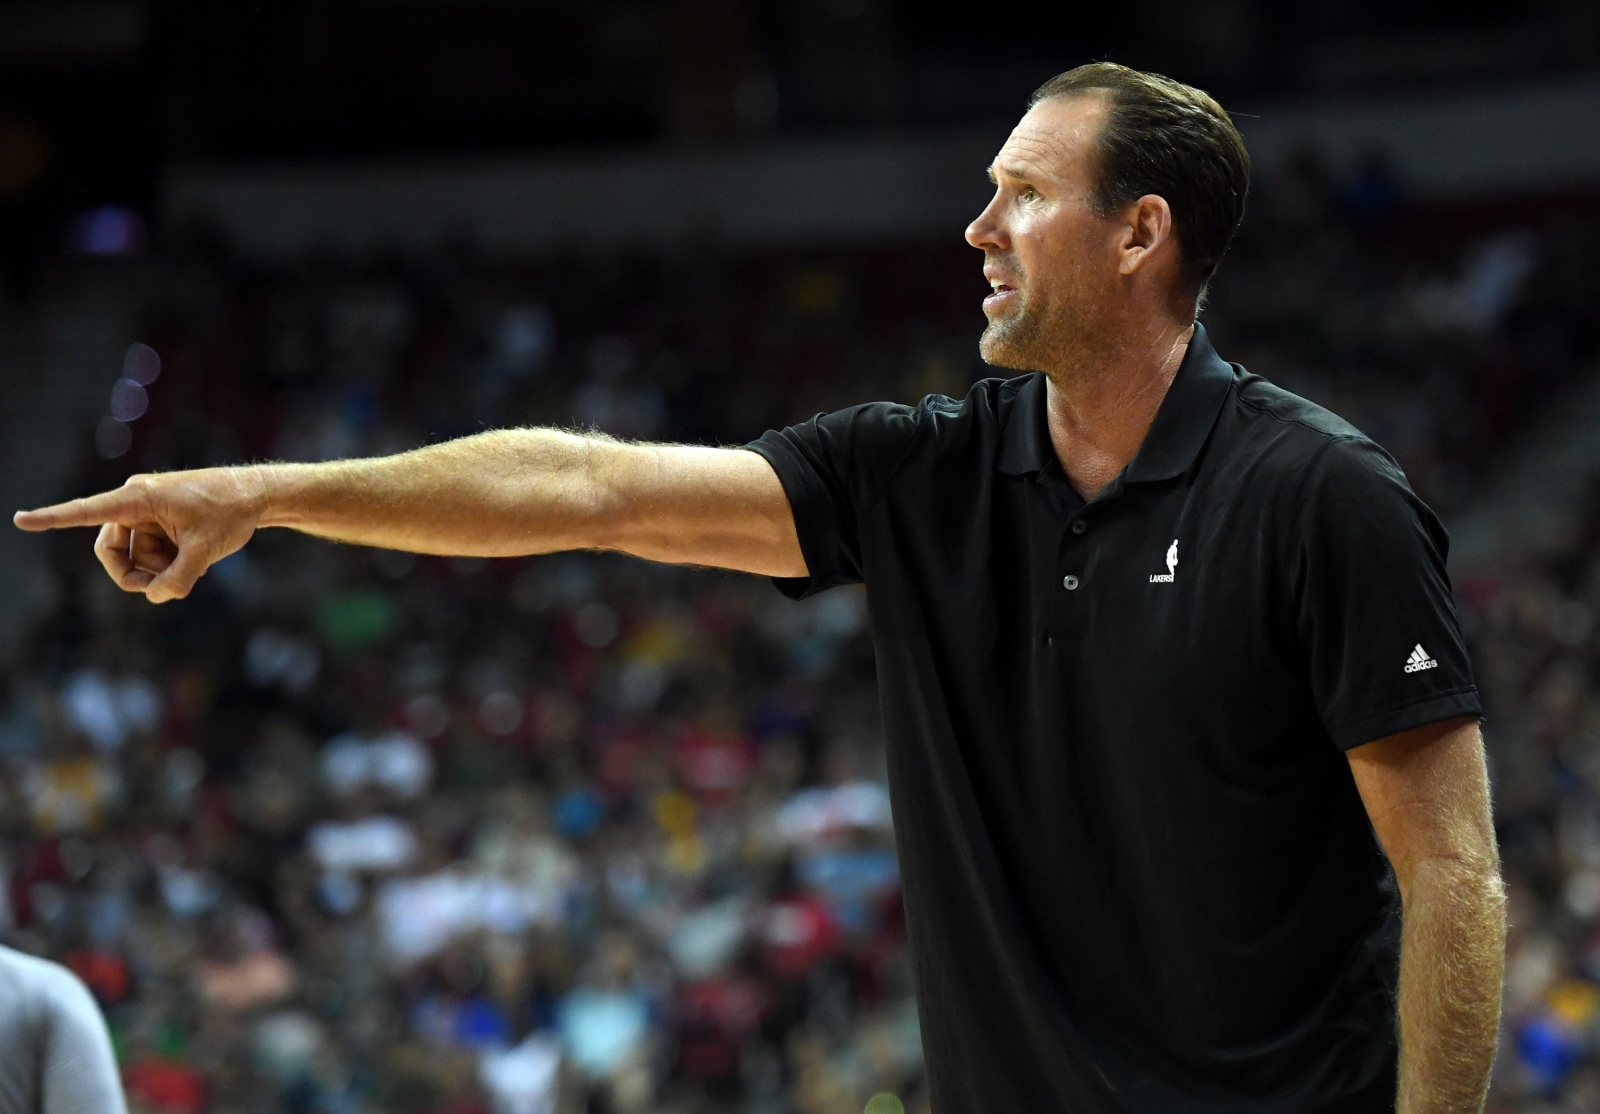 With Jud Buechler gone, who could the Lakers hire as their next